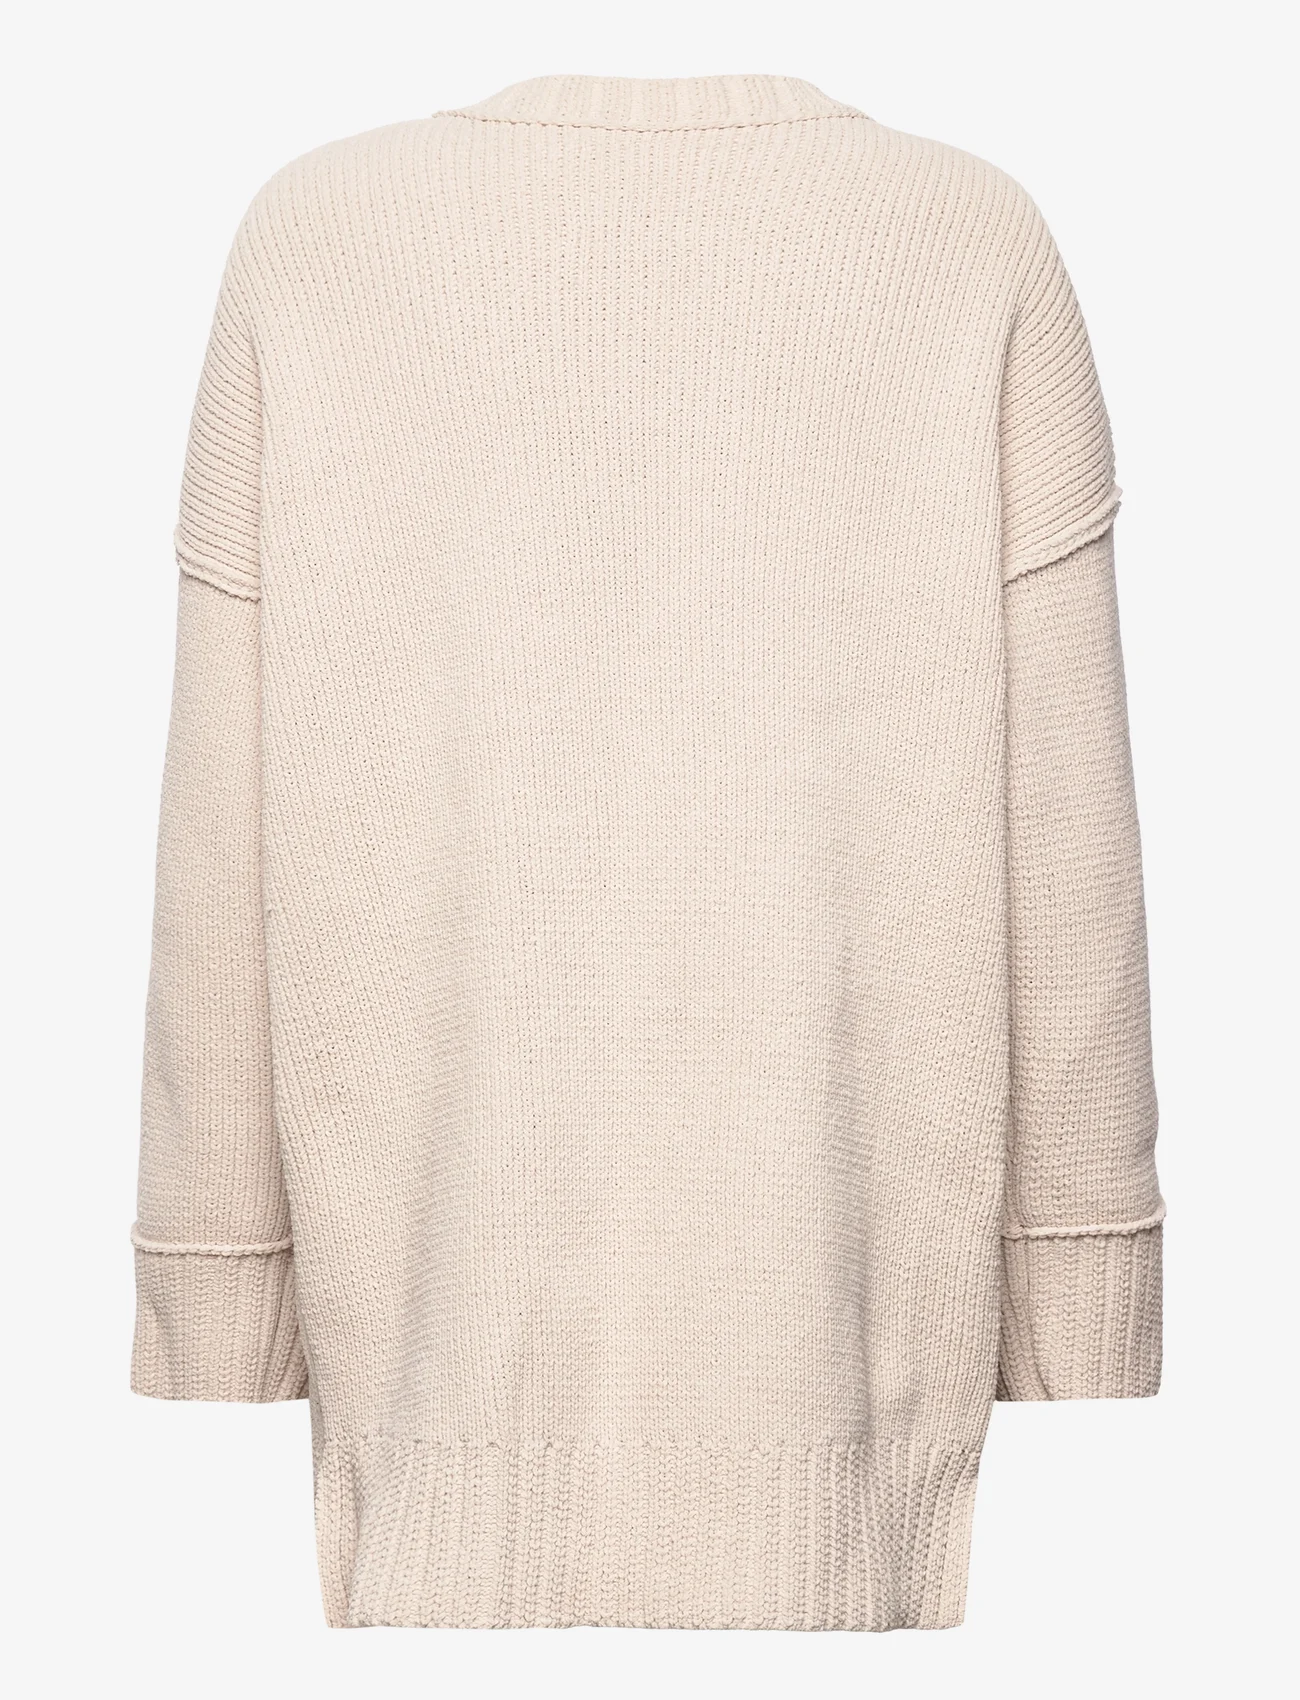 Abercrombie & Fitch - ANF WOMENS SWEATERS - kardiganid - pumise stone - 1